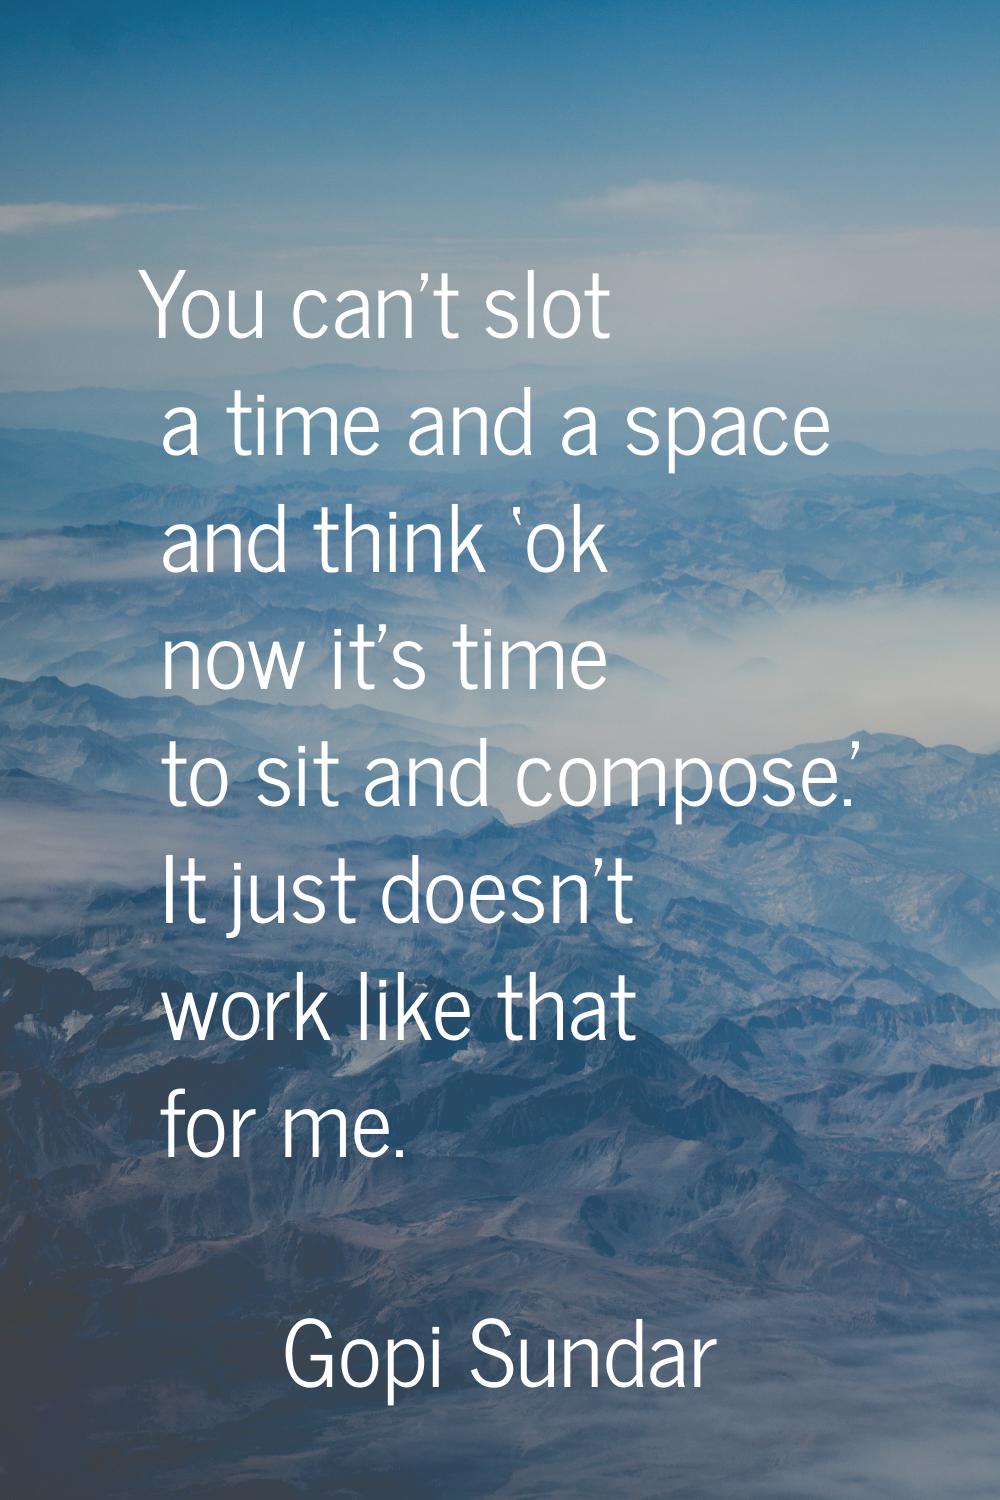 You can't slot a time and a space and think ‘ok now it's time to sit and compose.' It just doesn't 